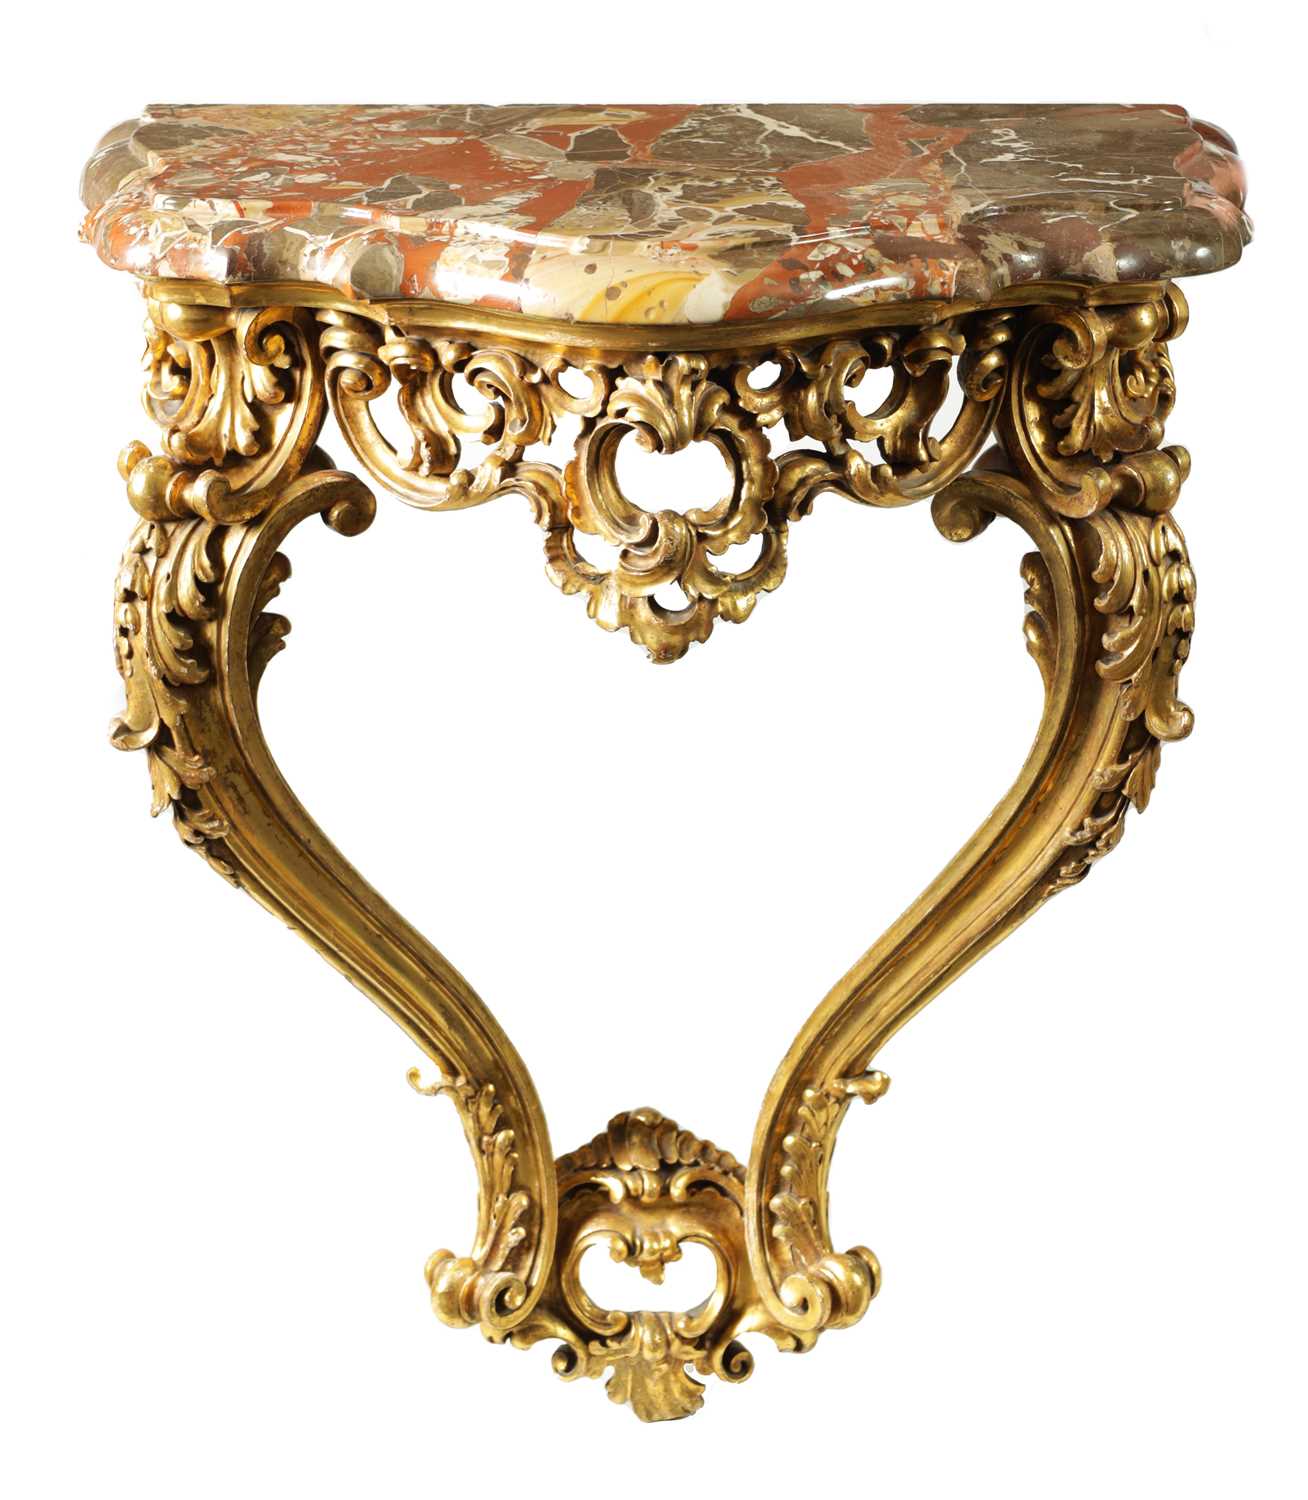 Lot 1478 - A 19TH CENTURY CARVED GILTWOOD PIER TABLE